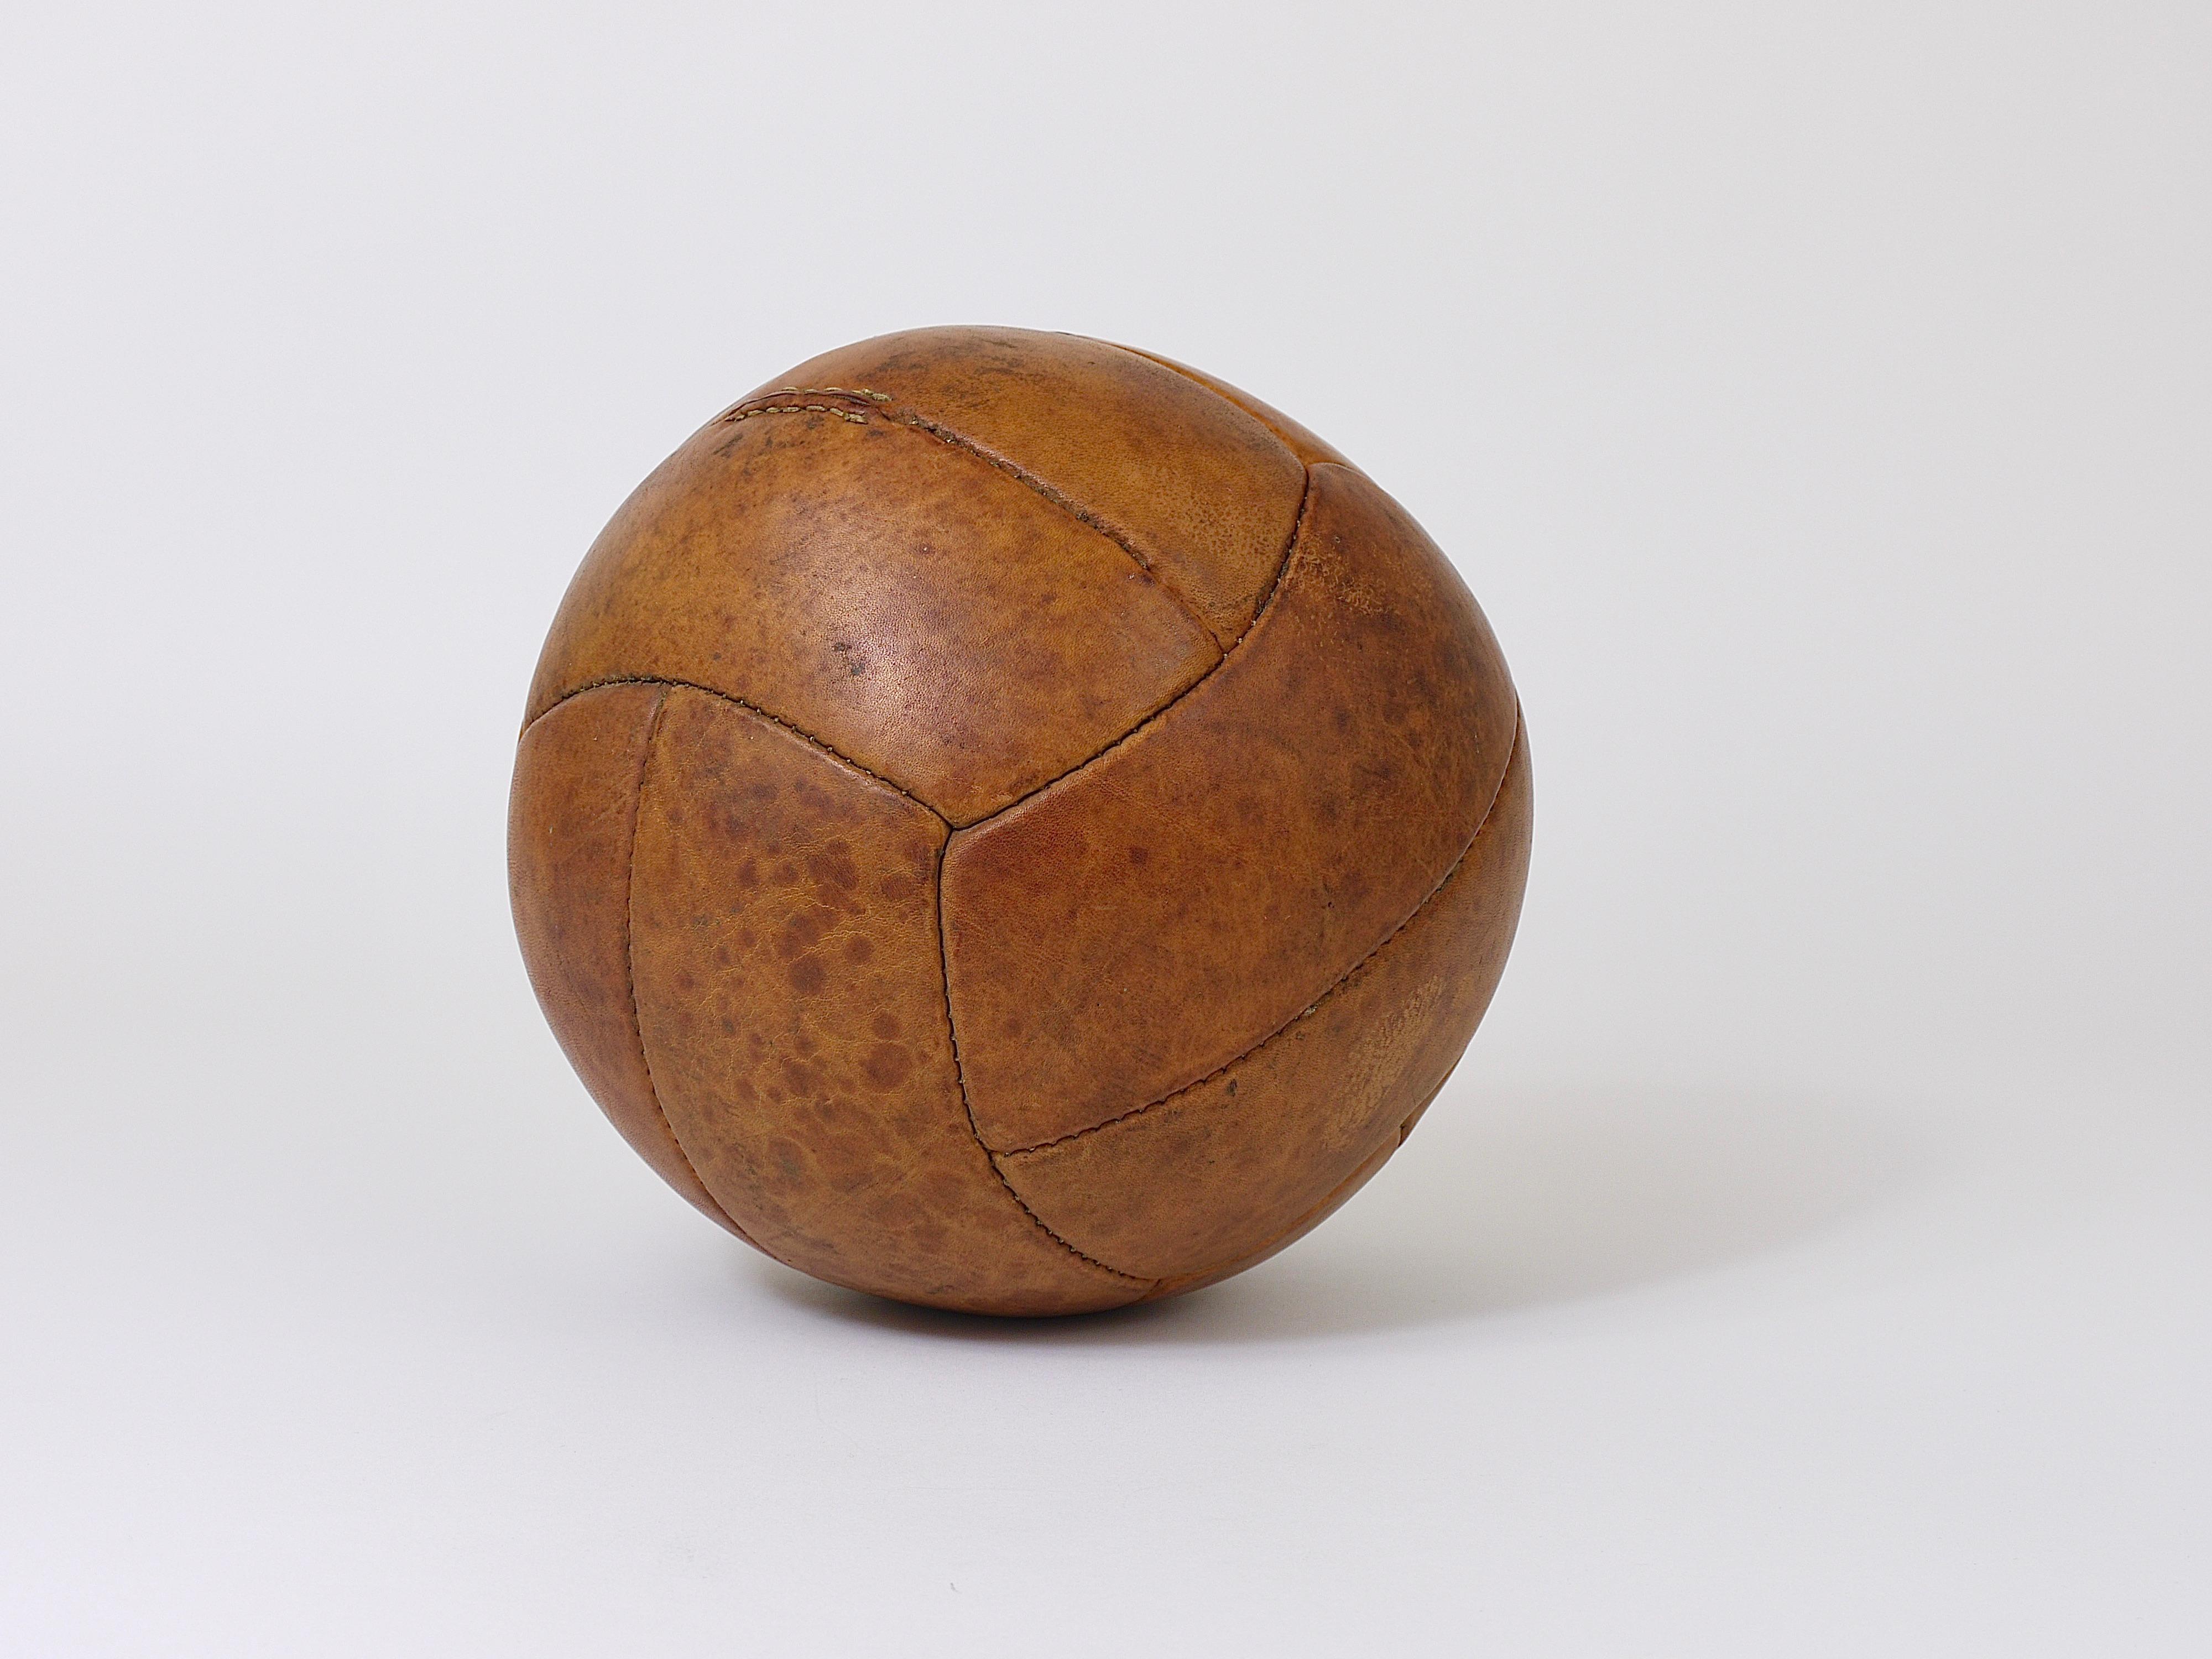 A decorative handcrafted medicine ball from a Czech gym, dated circa 1930s. Made of thick cognac-brown saddle leather in good vintage condition with charming patina. Cleaned and treated with special leather care. Measure: Diameter 9 inches, weight 2